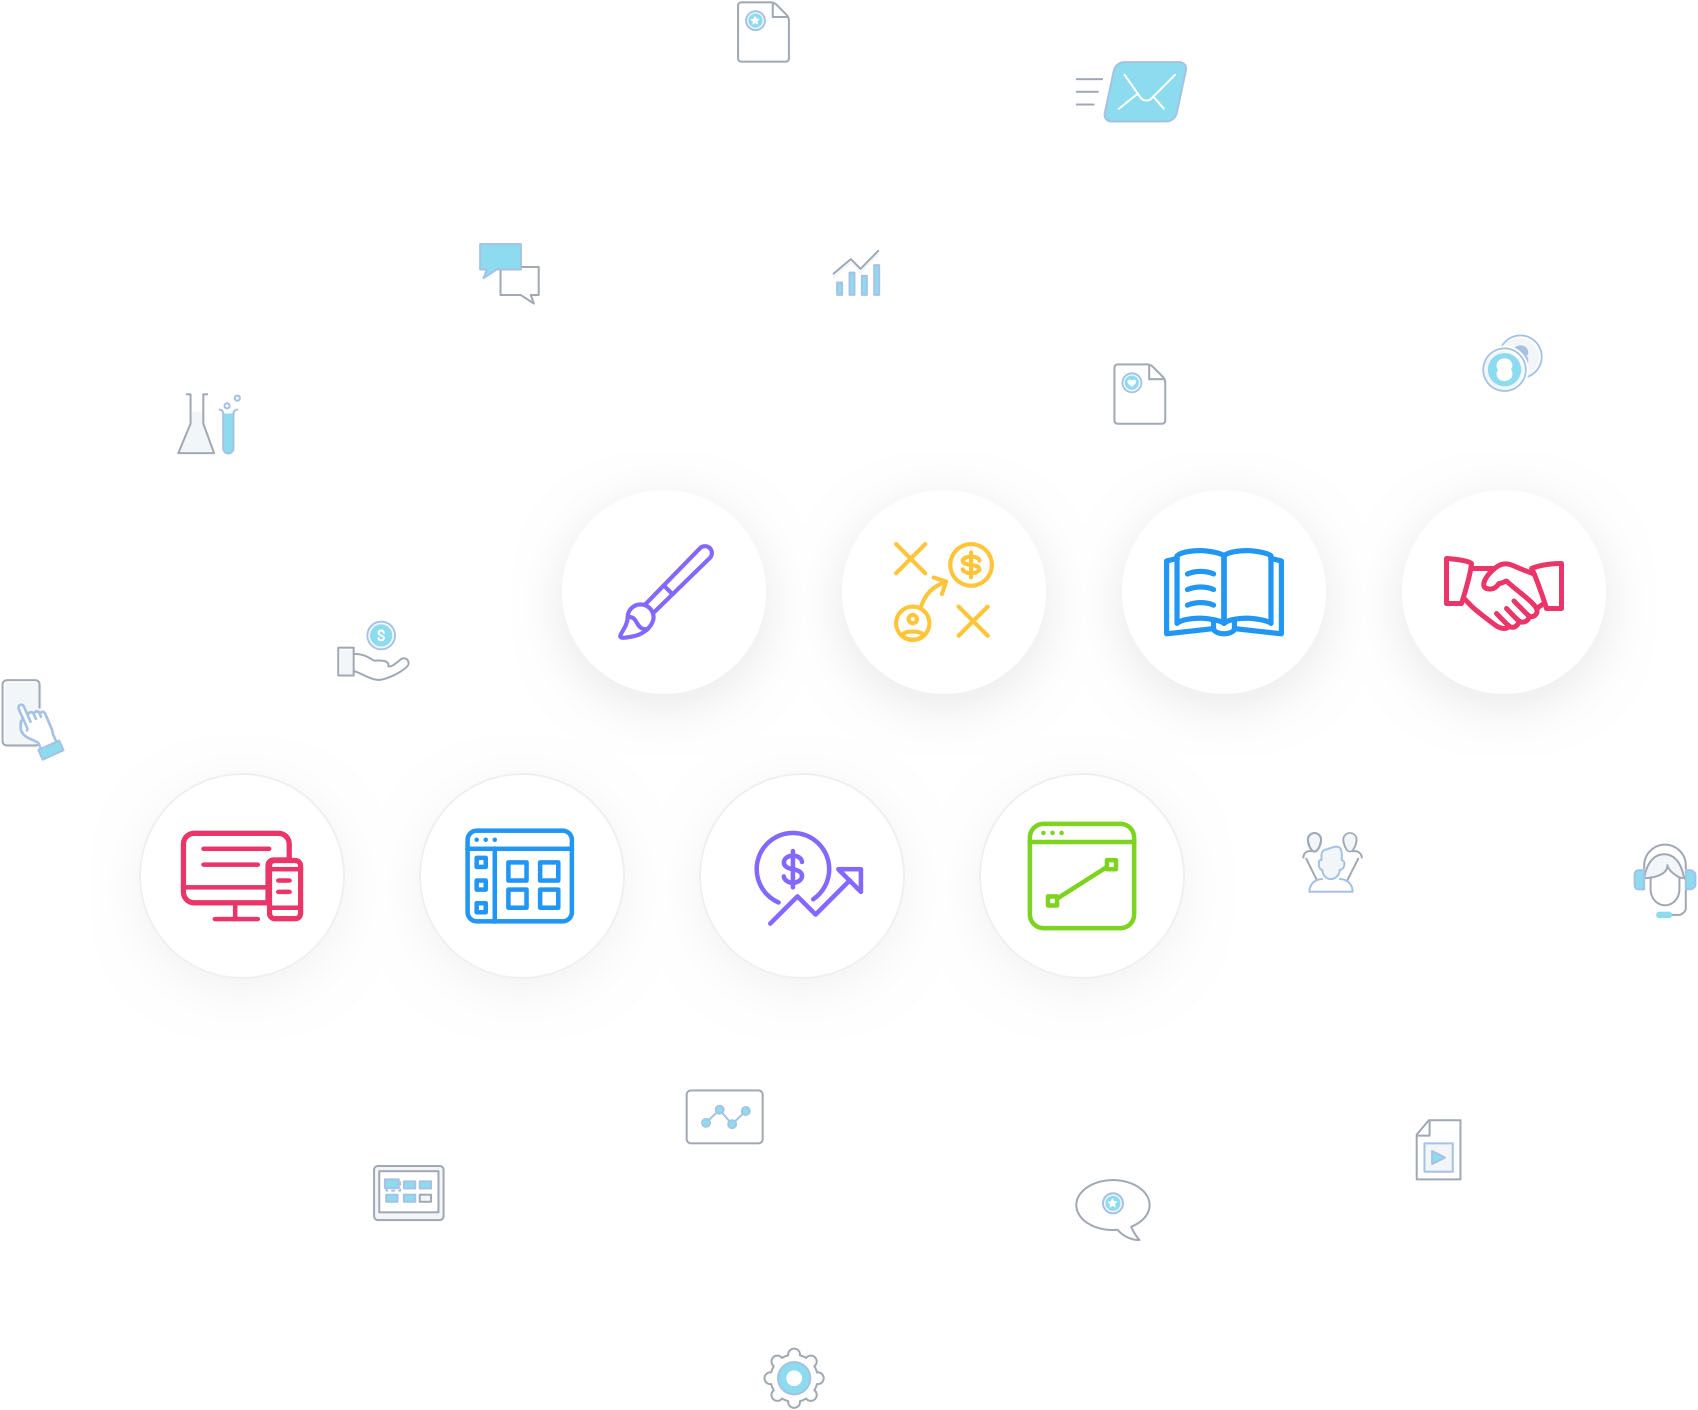 volusion icongraphy styleguide2